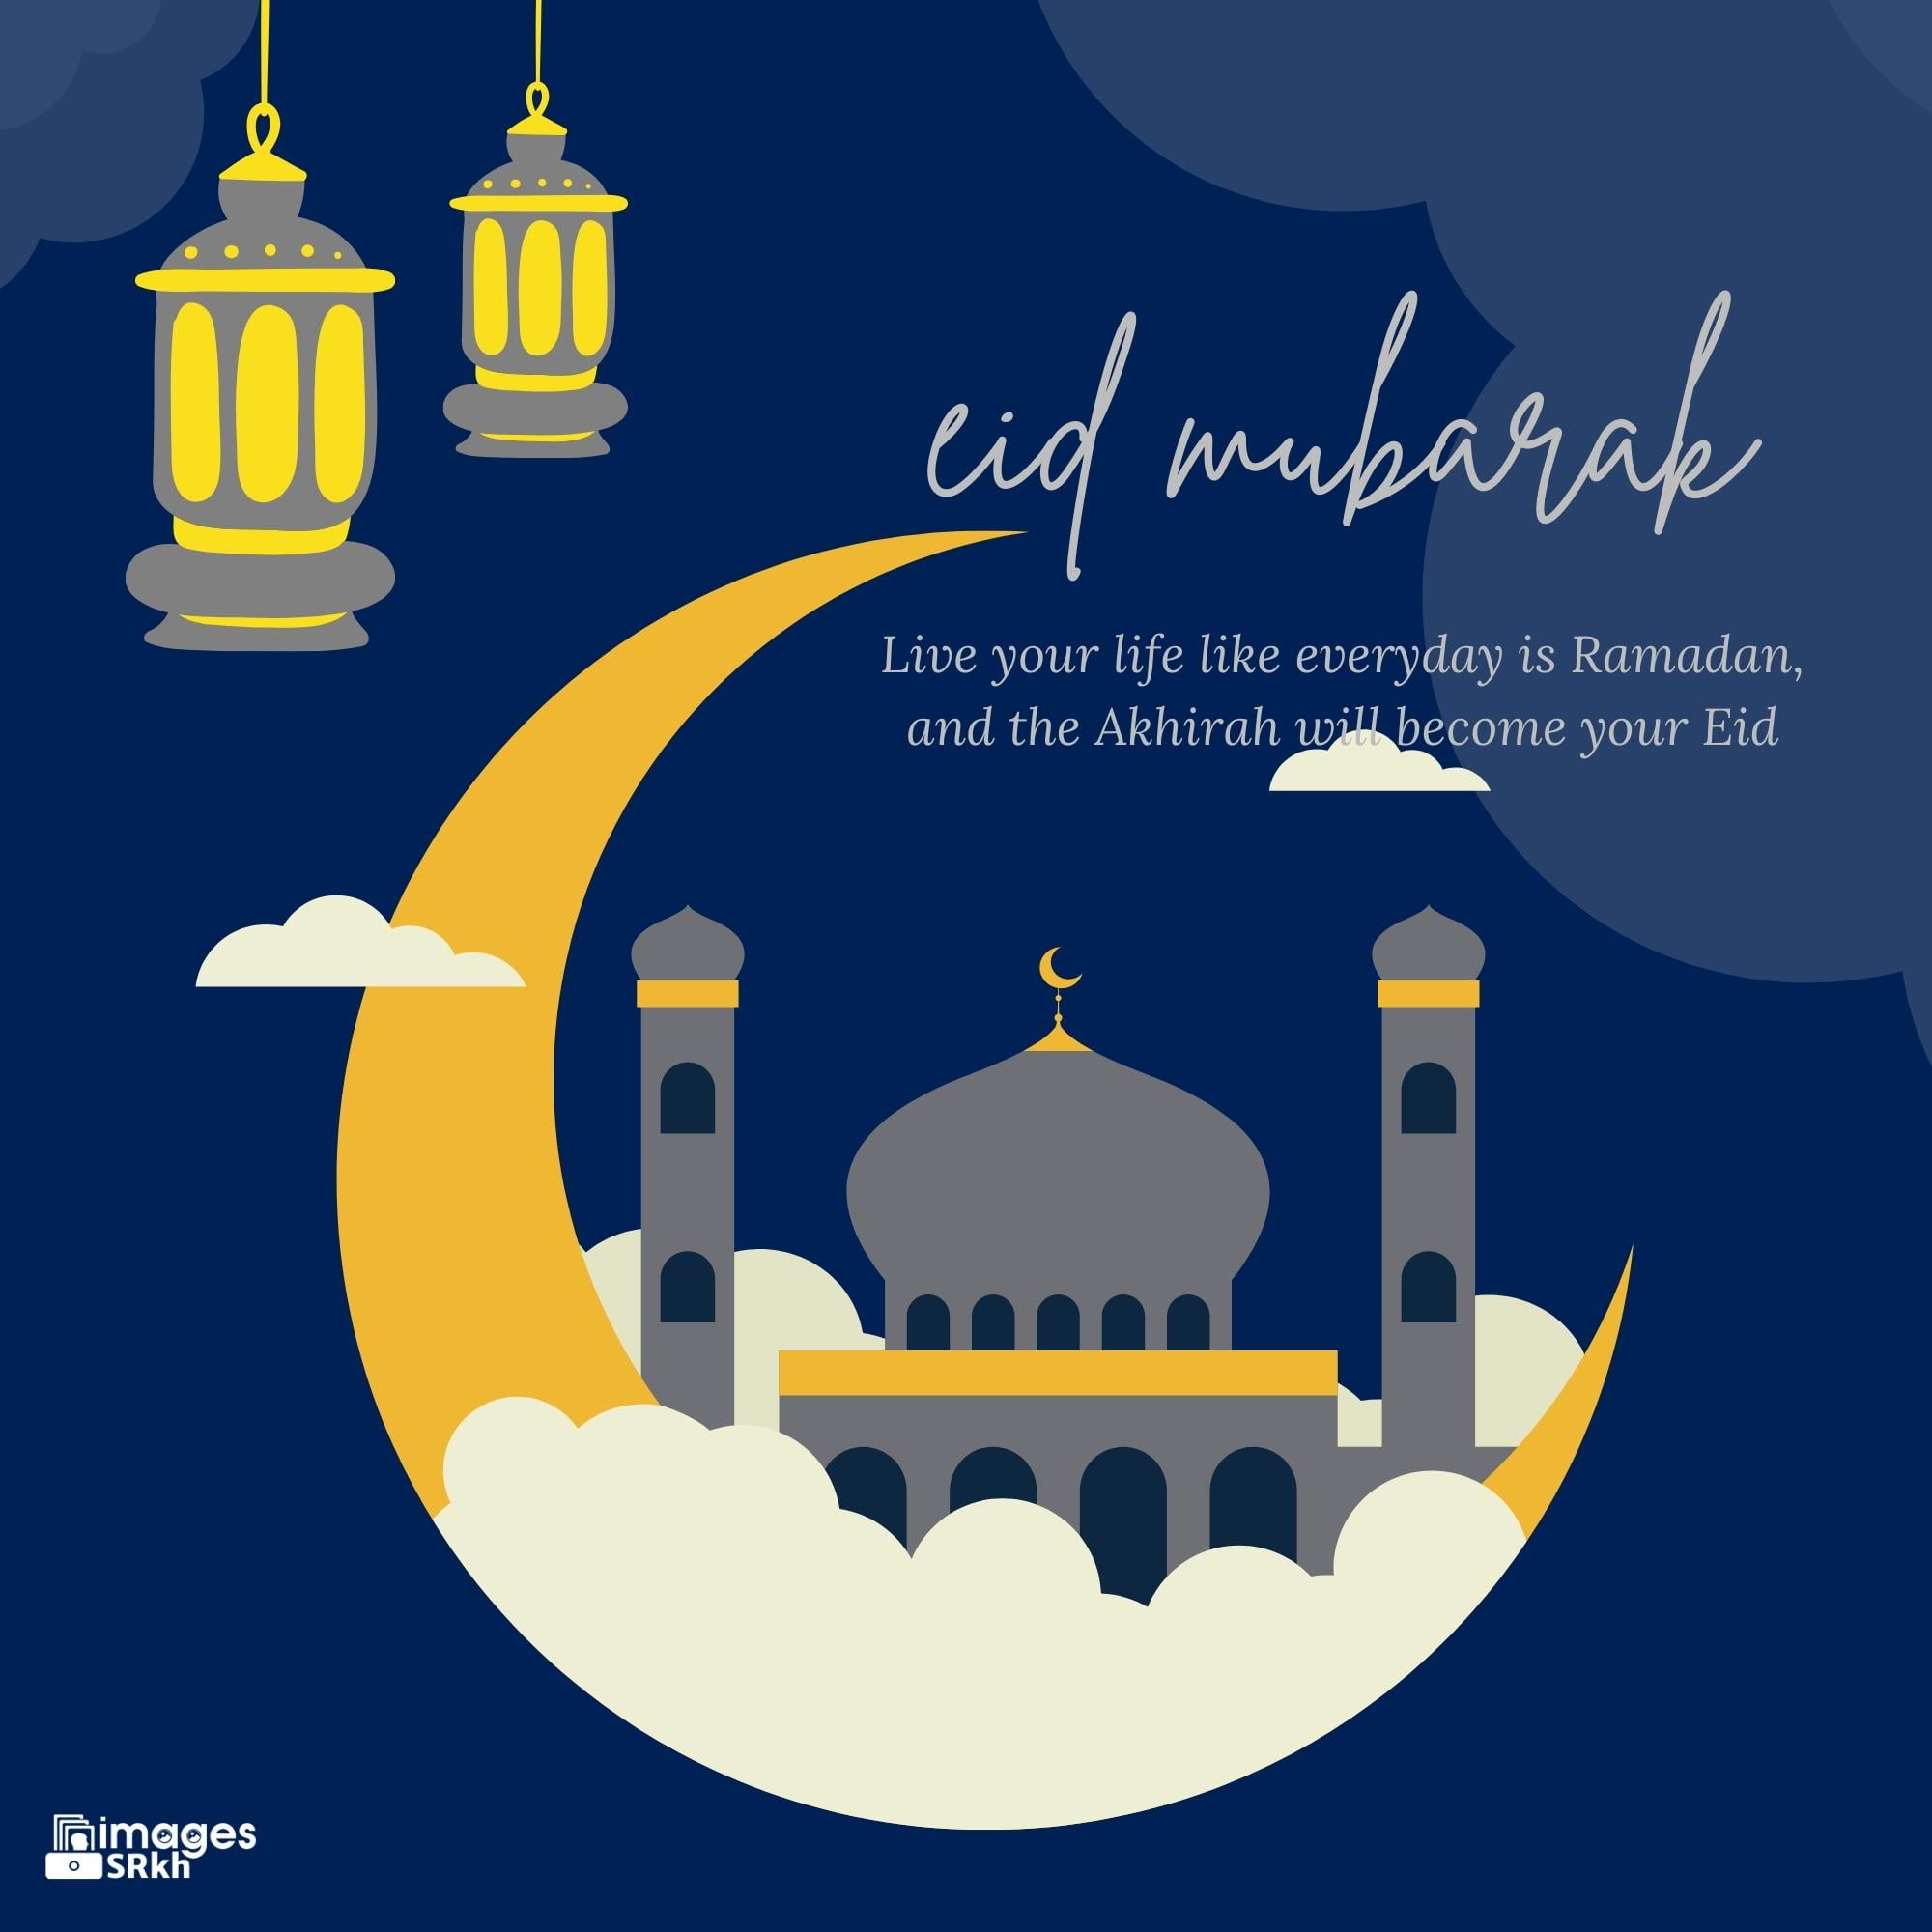 Quotes For Eid Mubarak (3) | Download free in Hd Quality | imagesSRkh